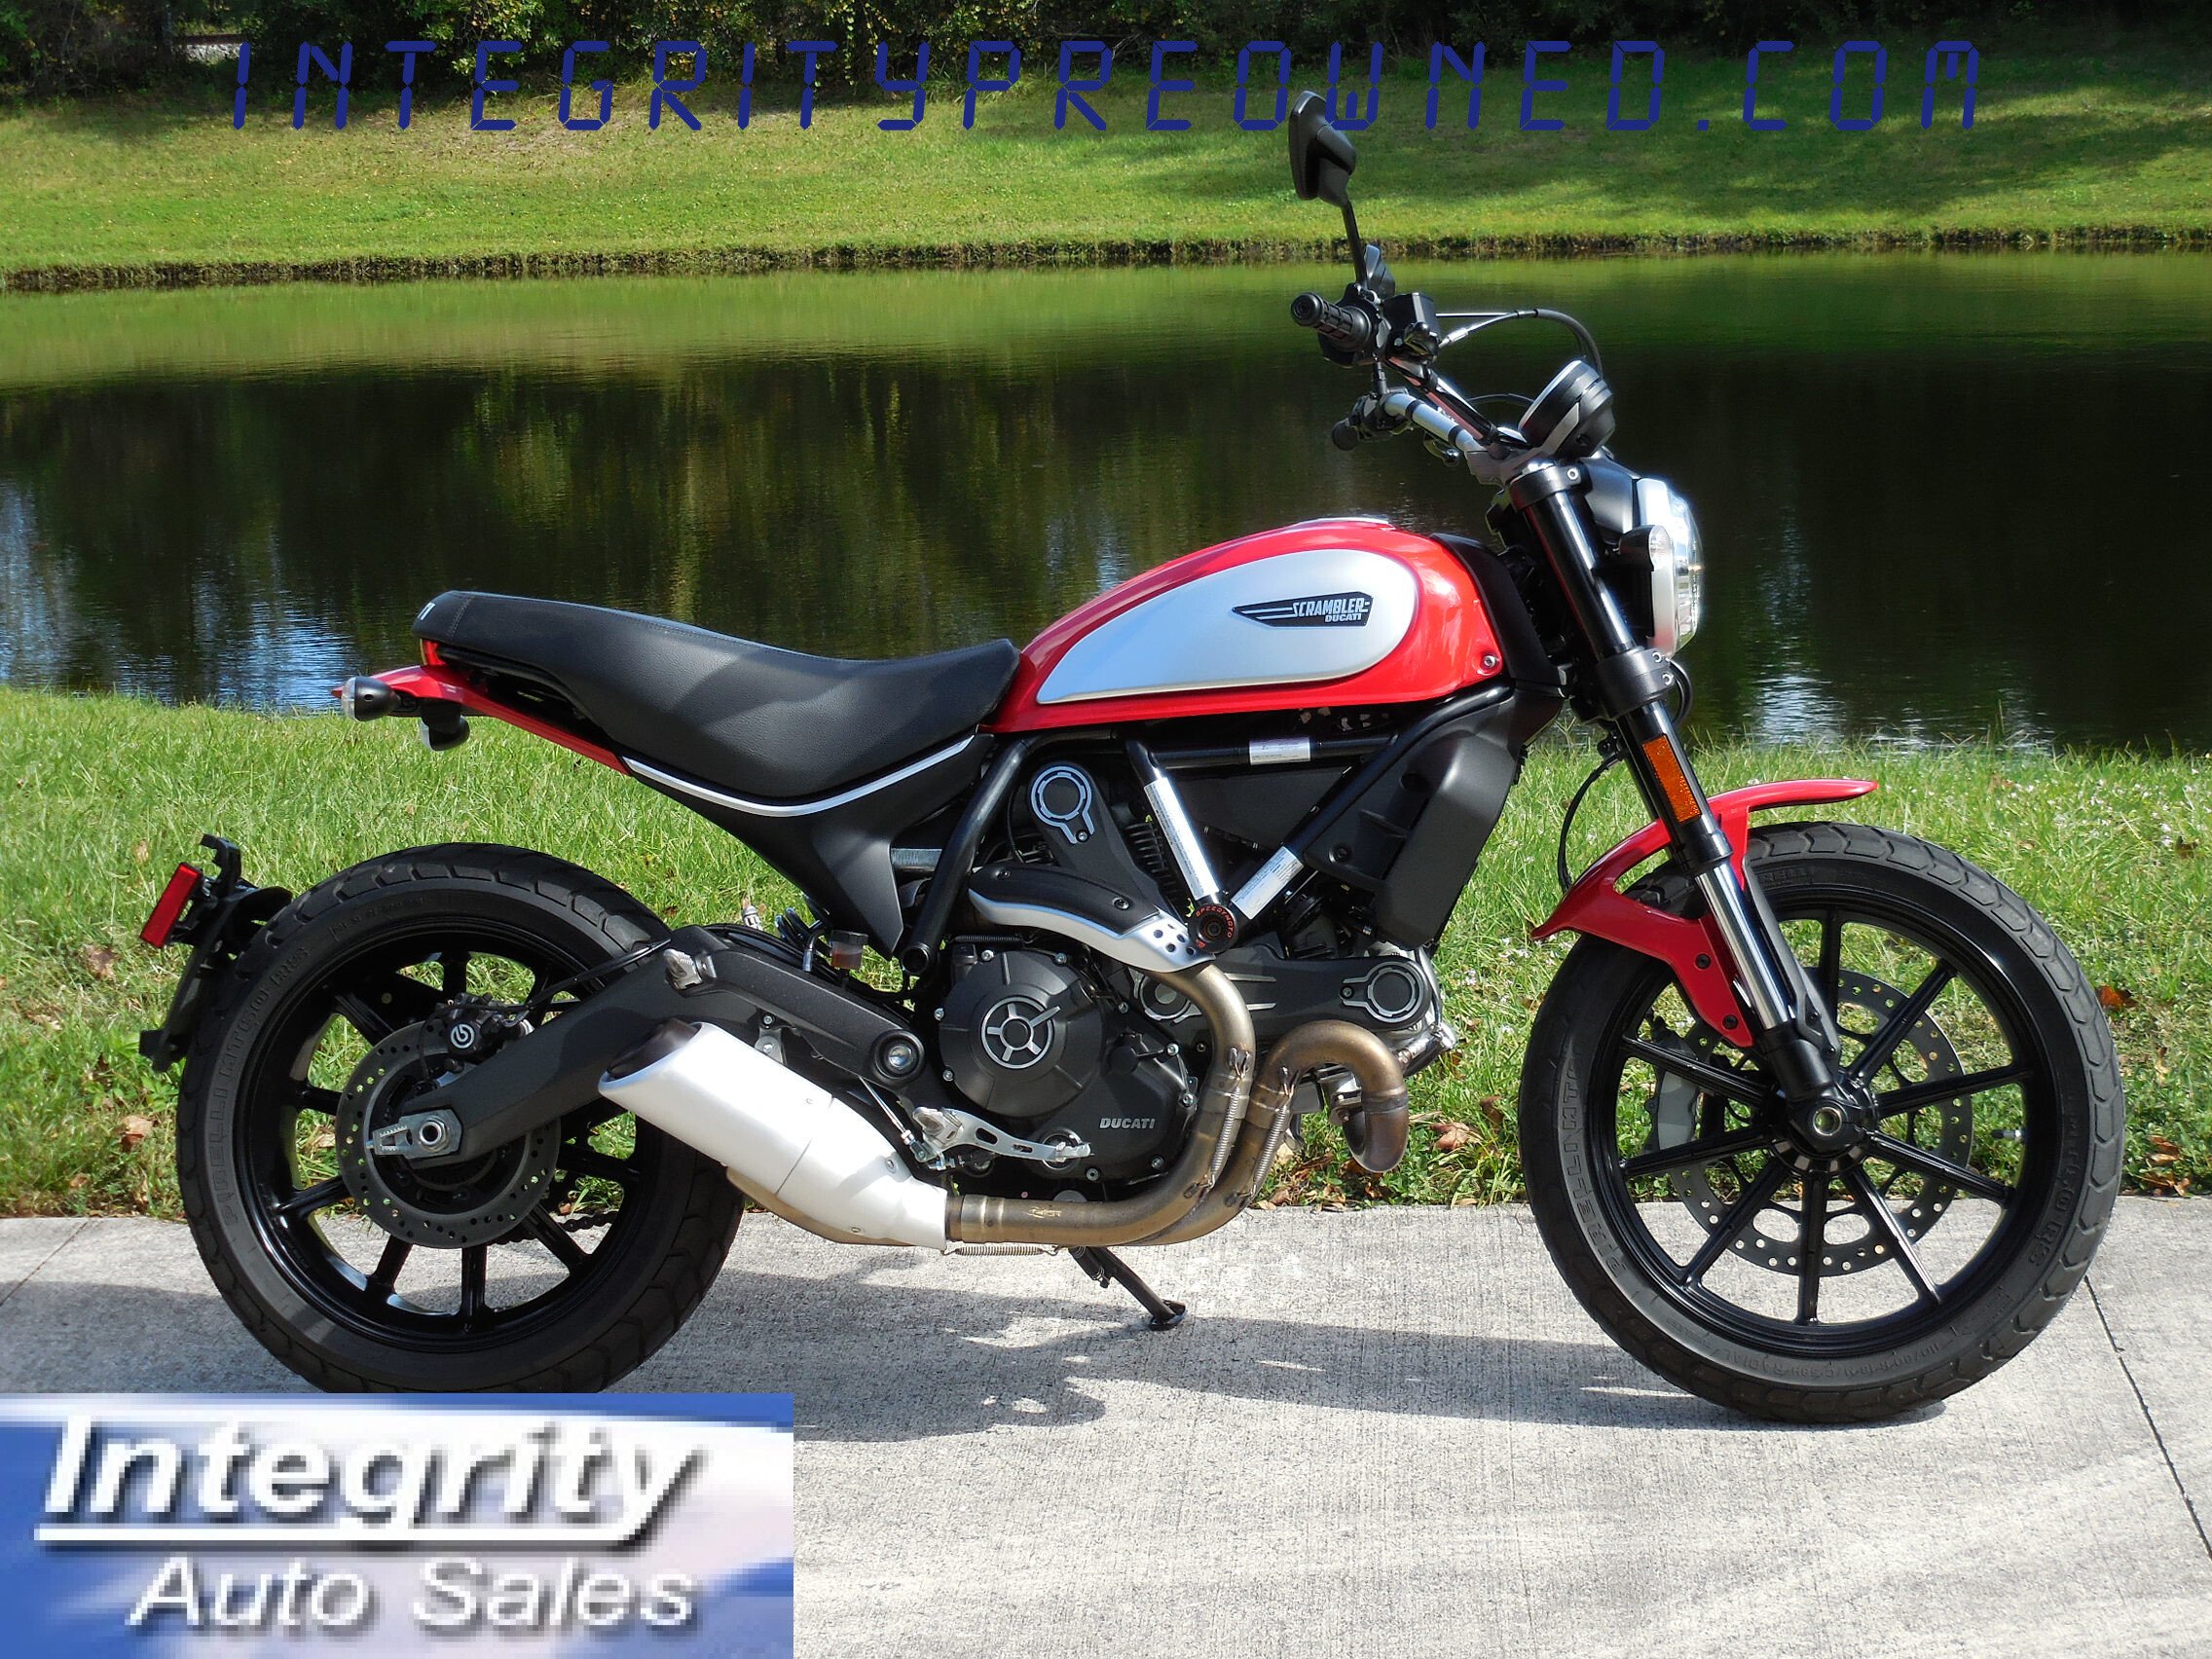 Motorcycles For Sale Near Port Orange Fl Motorcycles On Autotrader